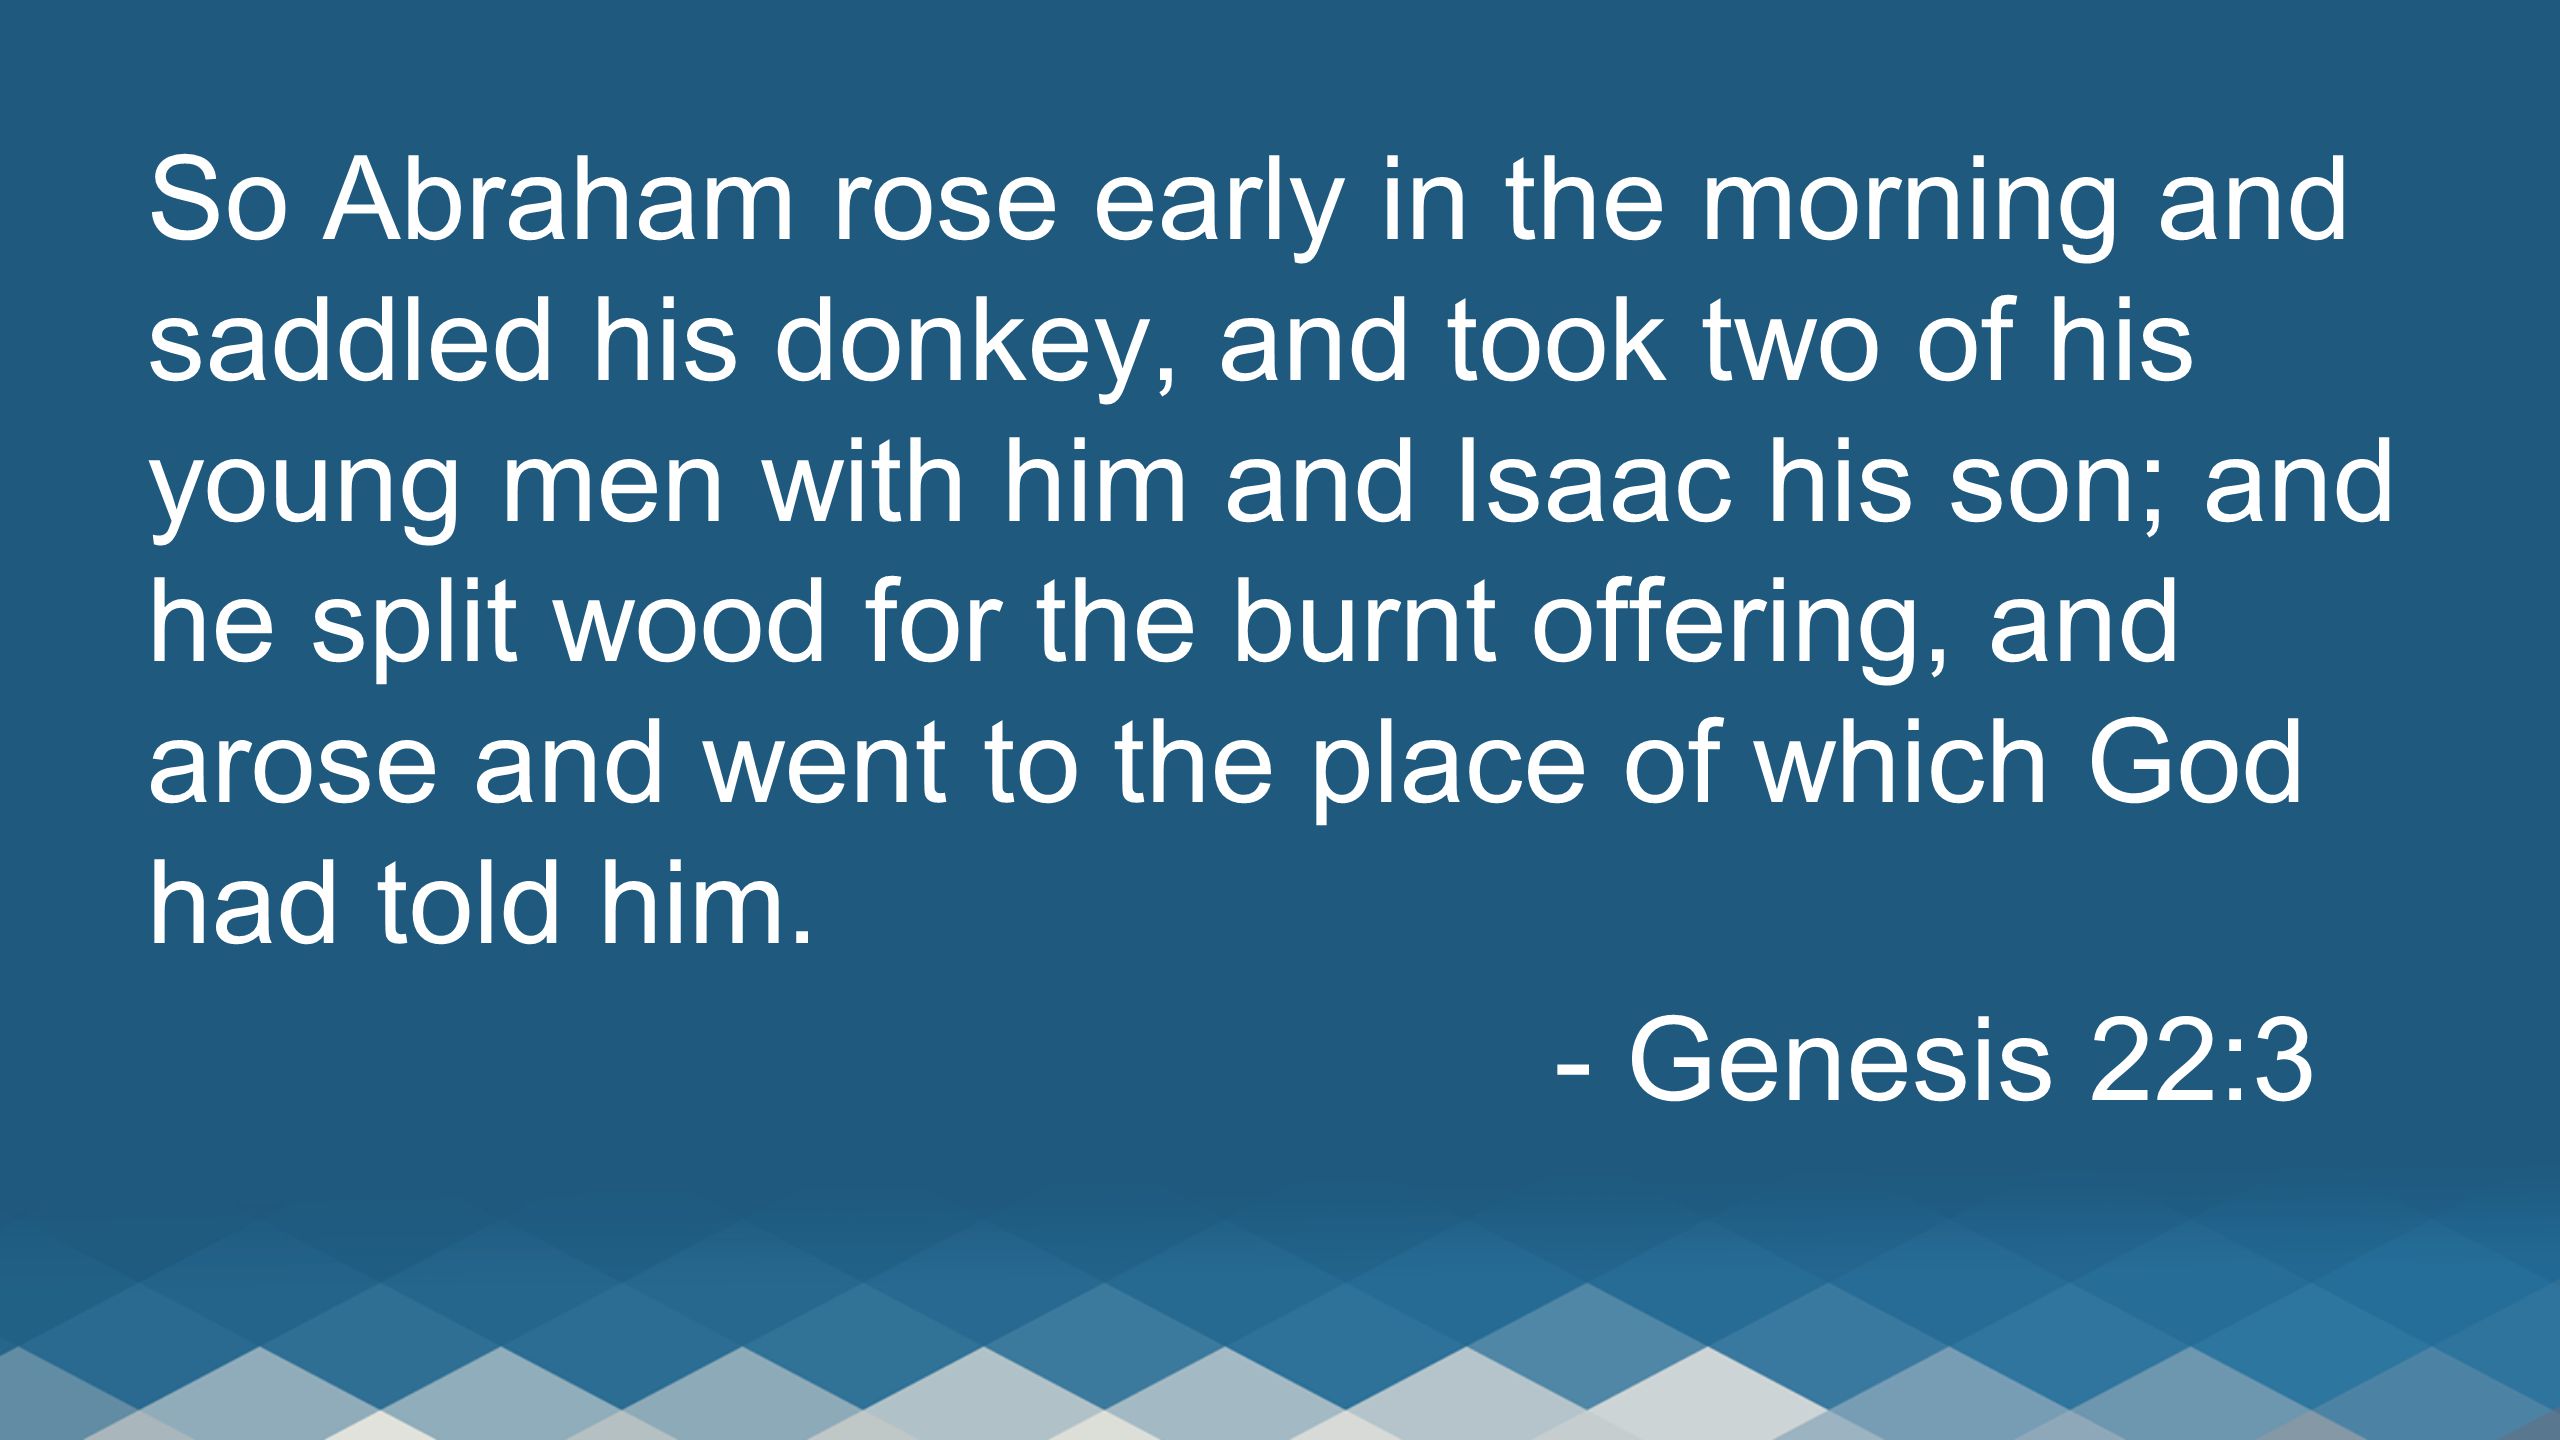 So Abraham rose early in the morning and saddled his donkey, and took two of his young men with him and Isaac his son; and he split wood for the burnt offering, and arose and went to the place of which God had told him.